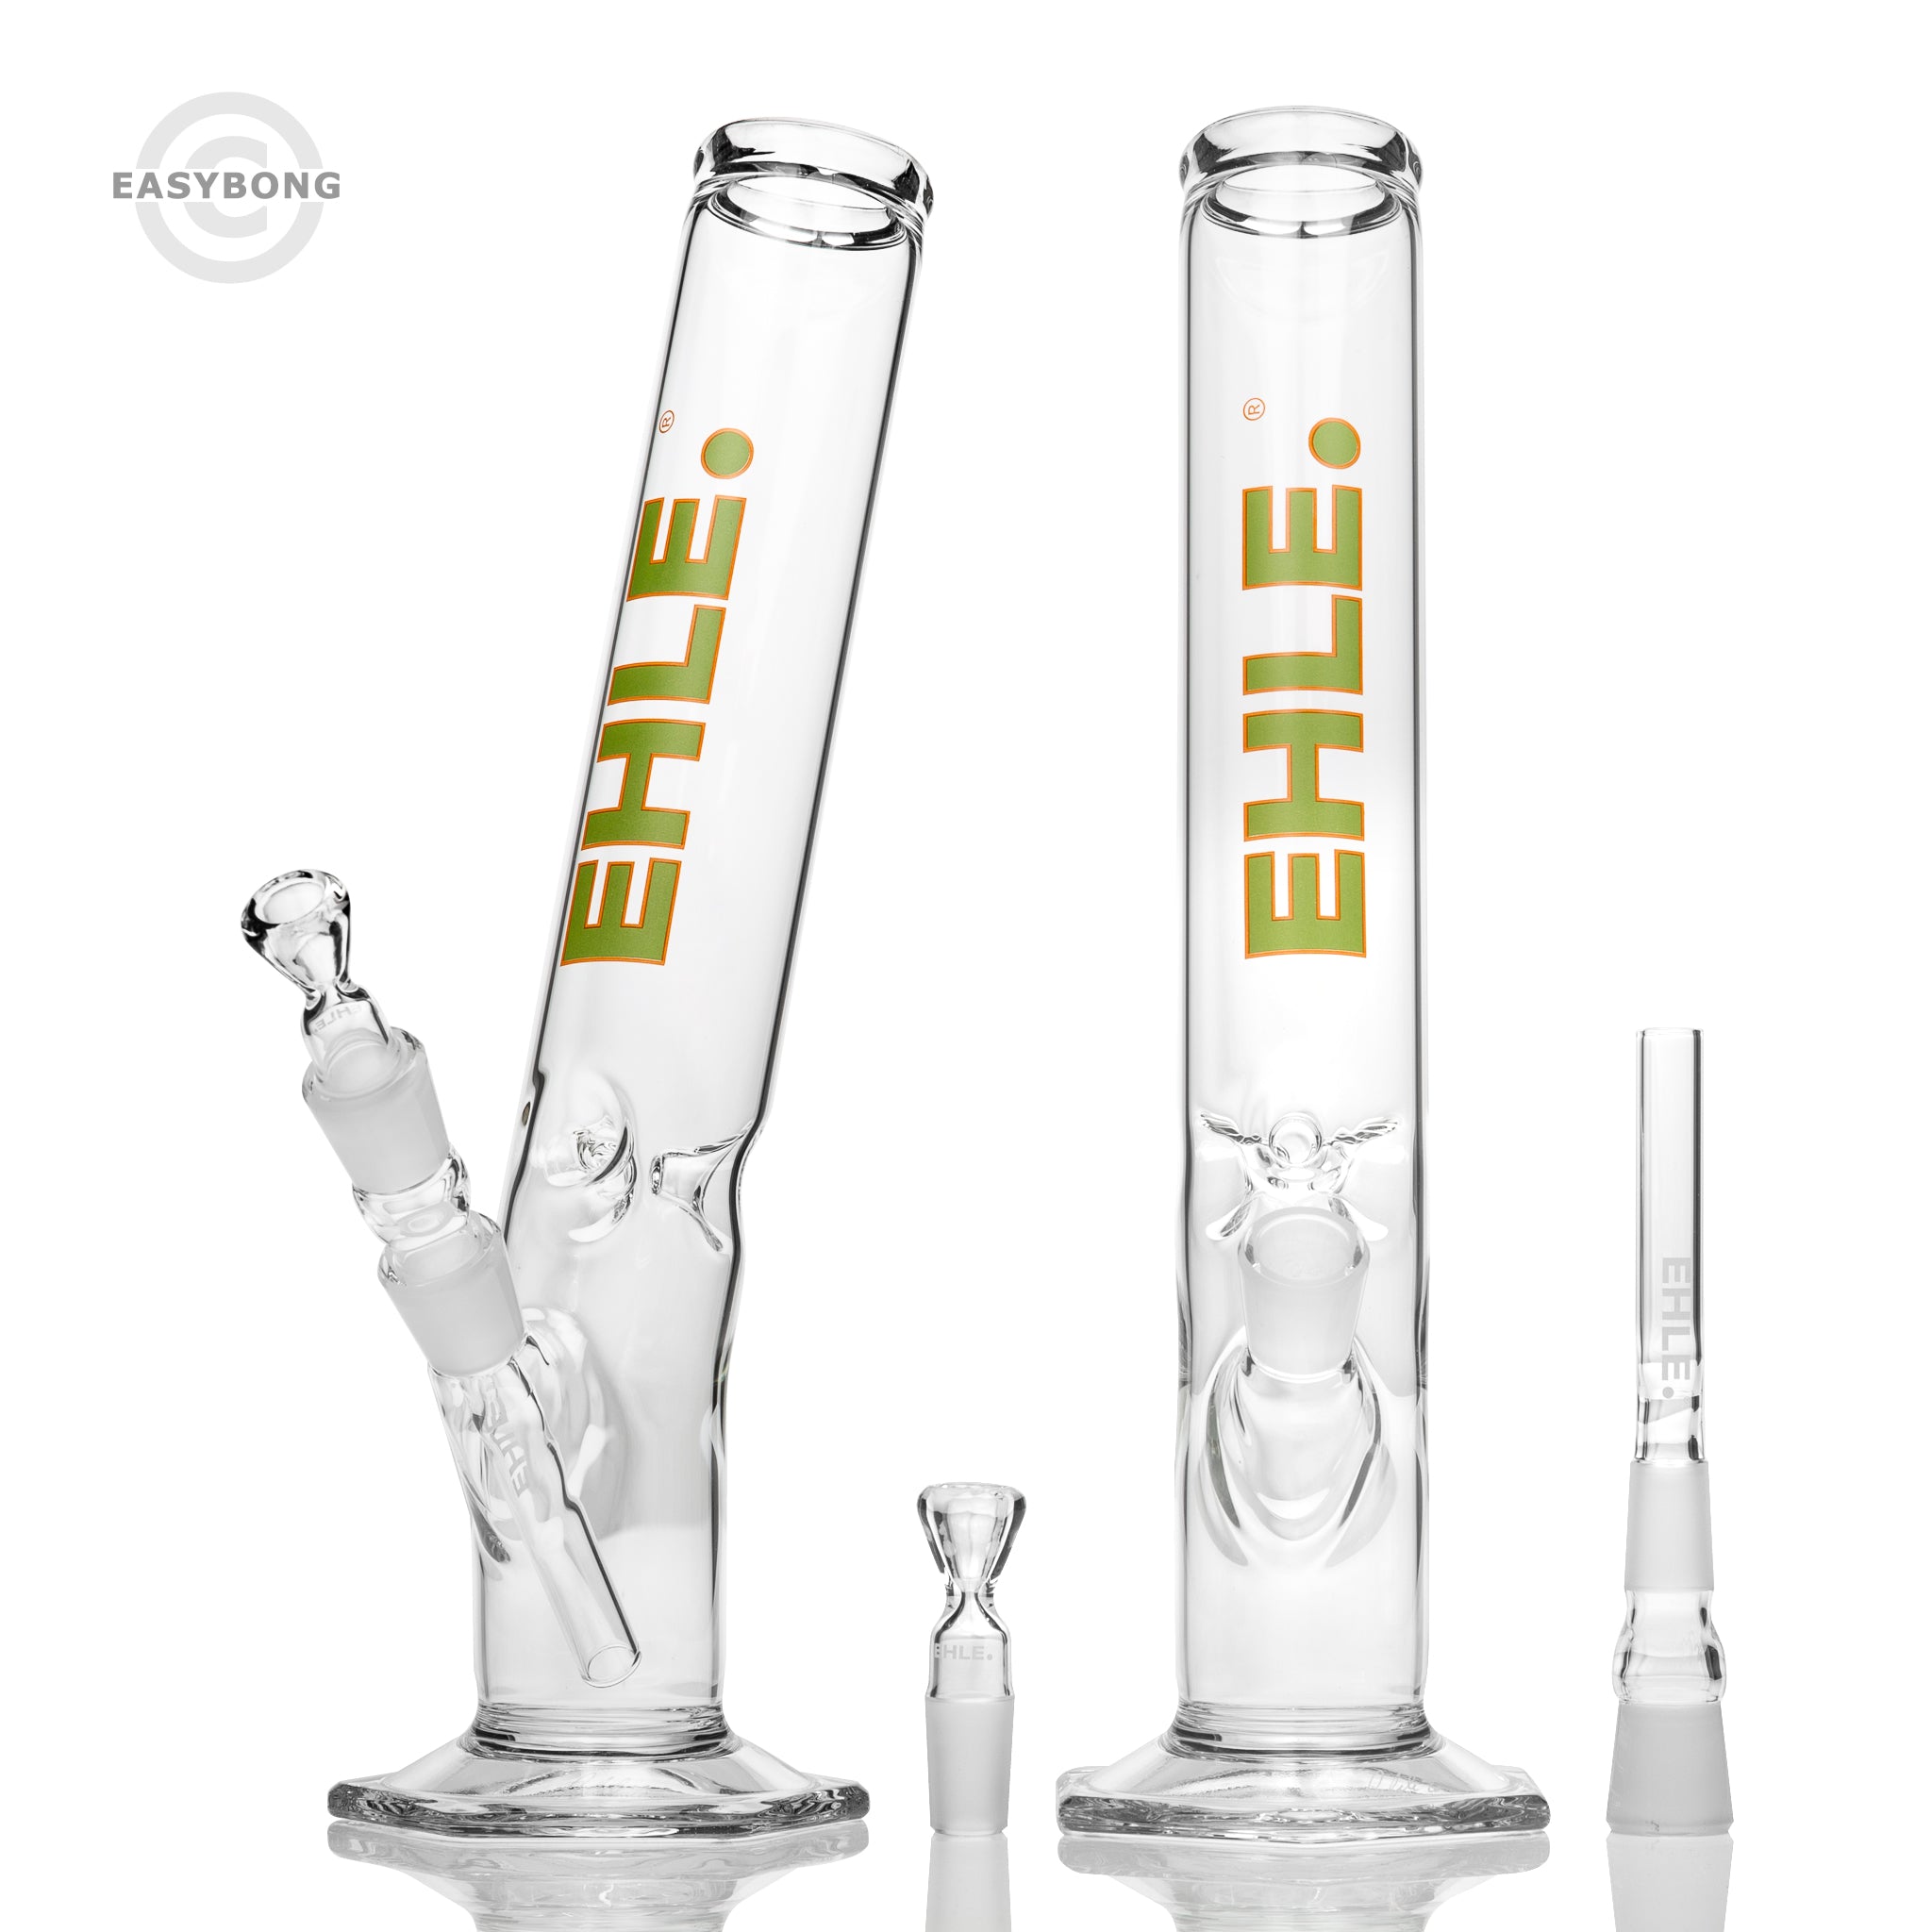 EHLE German made glass bongs for sale in Australia.